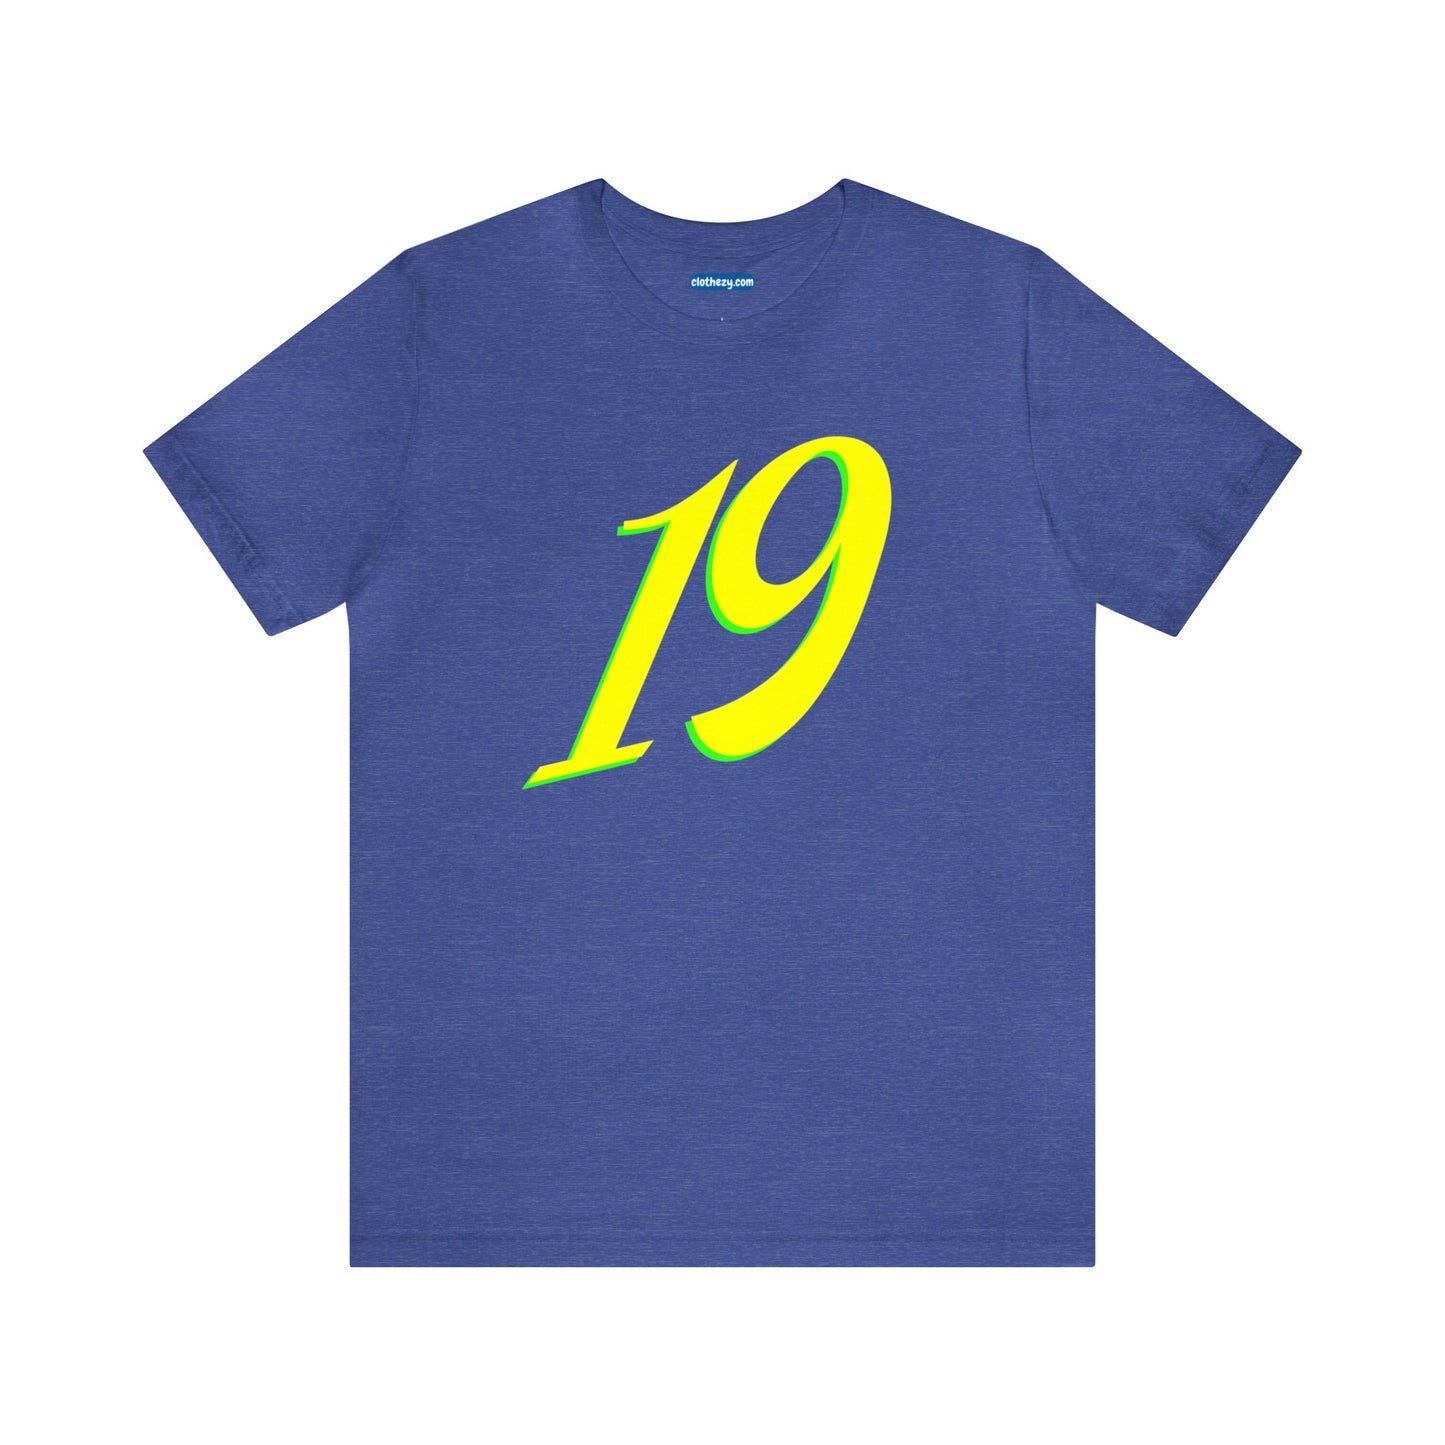 Number 19 Design - Soft Cotton Tee for birthdays and celebrations, Gift for friends and family, Multiple Options by clothezy.com in Navy Size Small - Buy Now